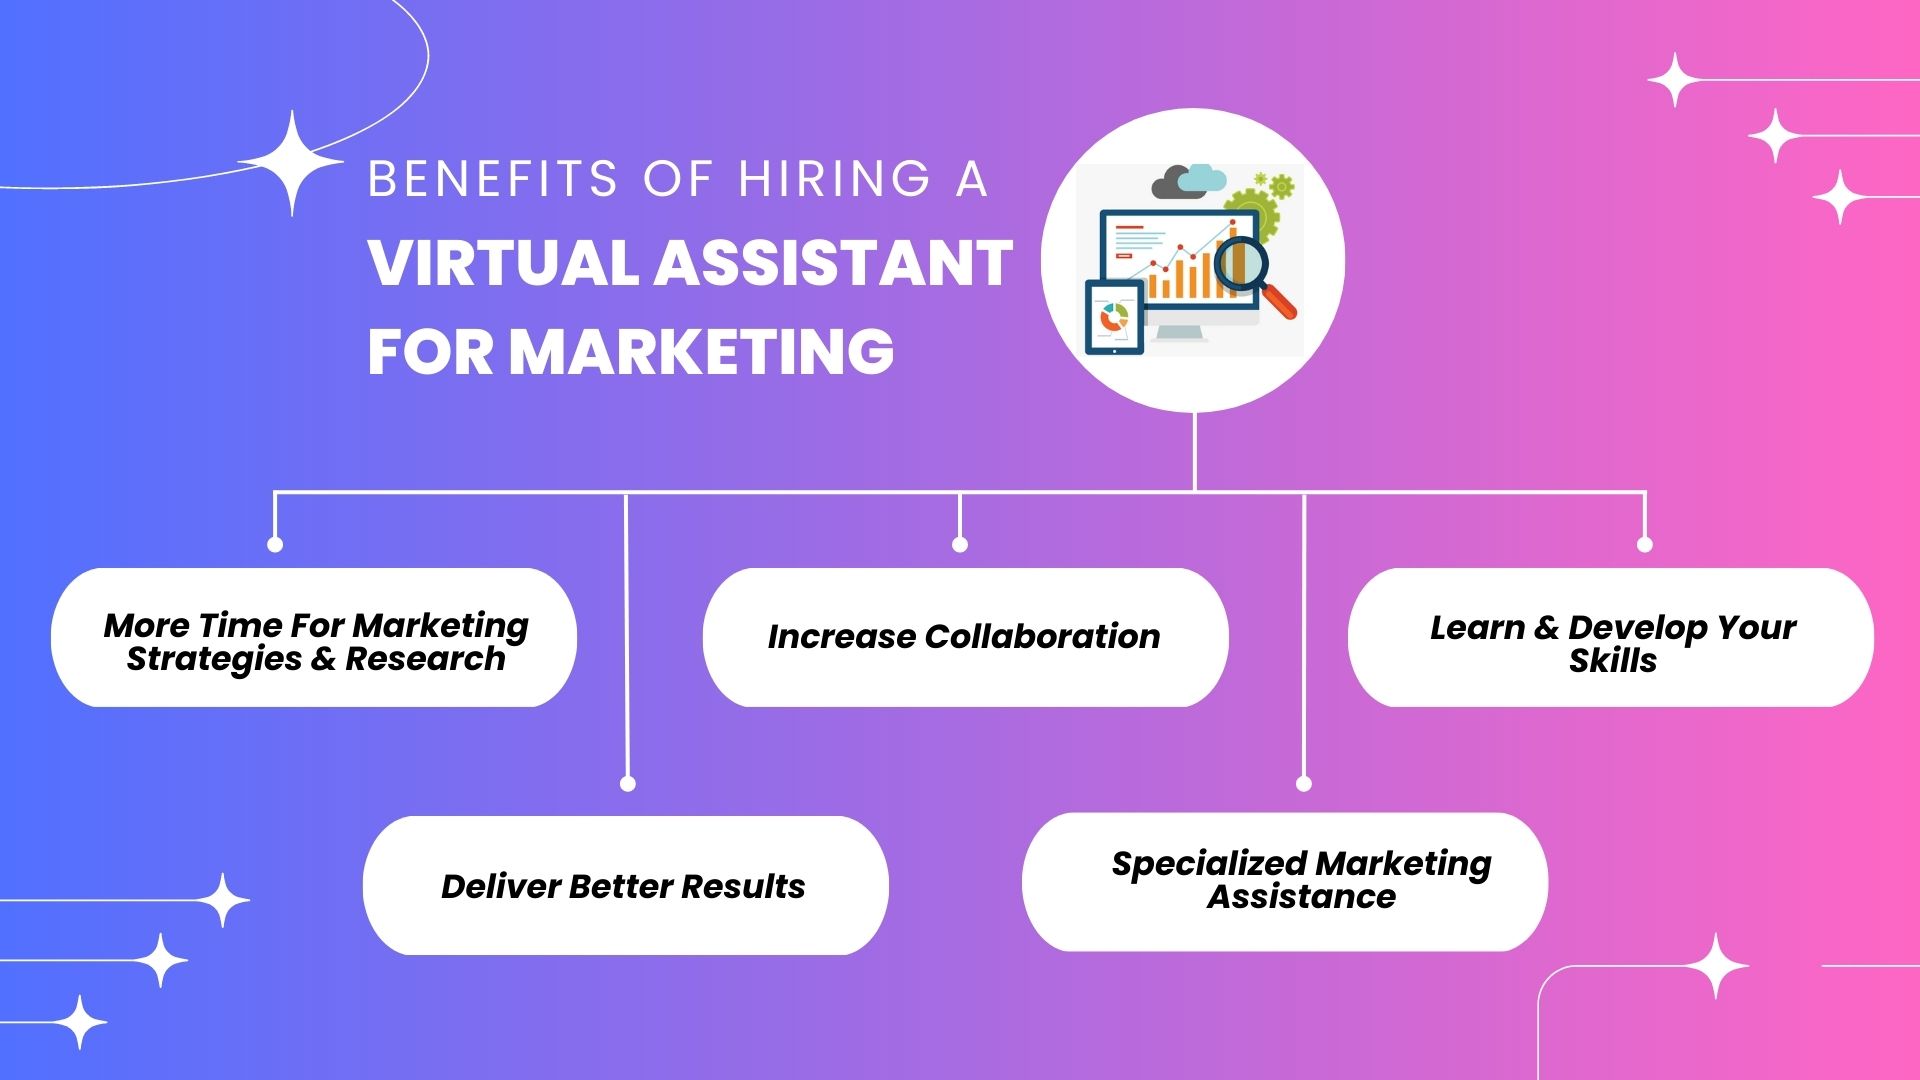 Benefits of Hiring a Virtual Assistant for Marketing